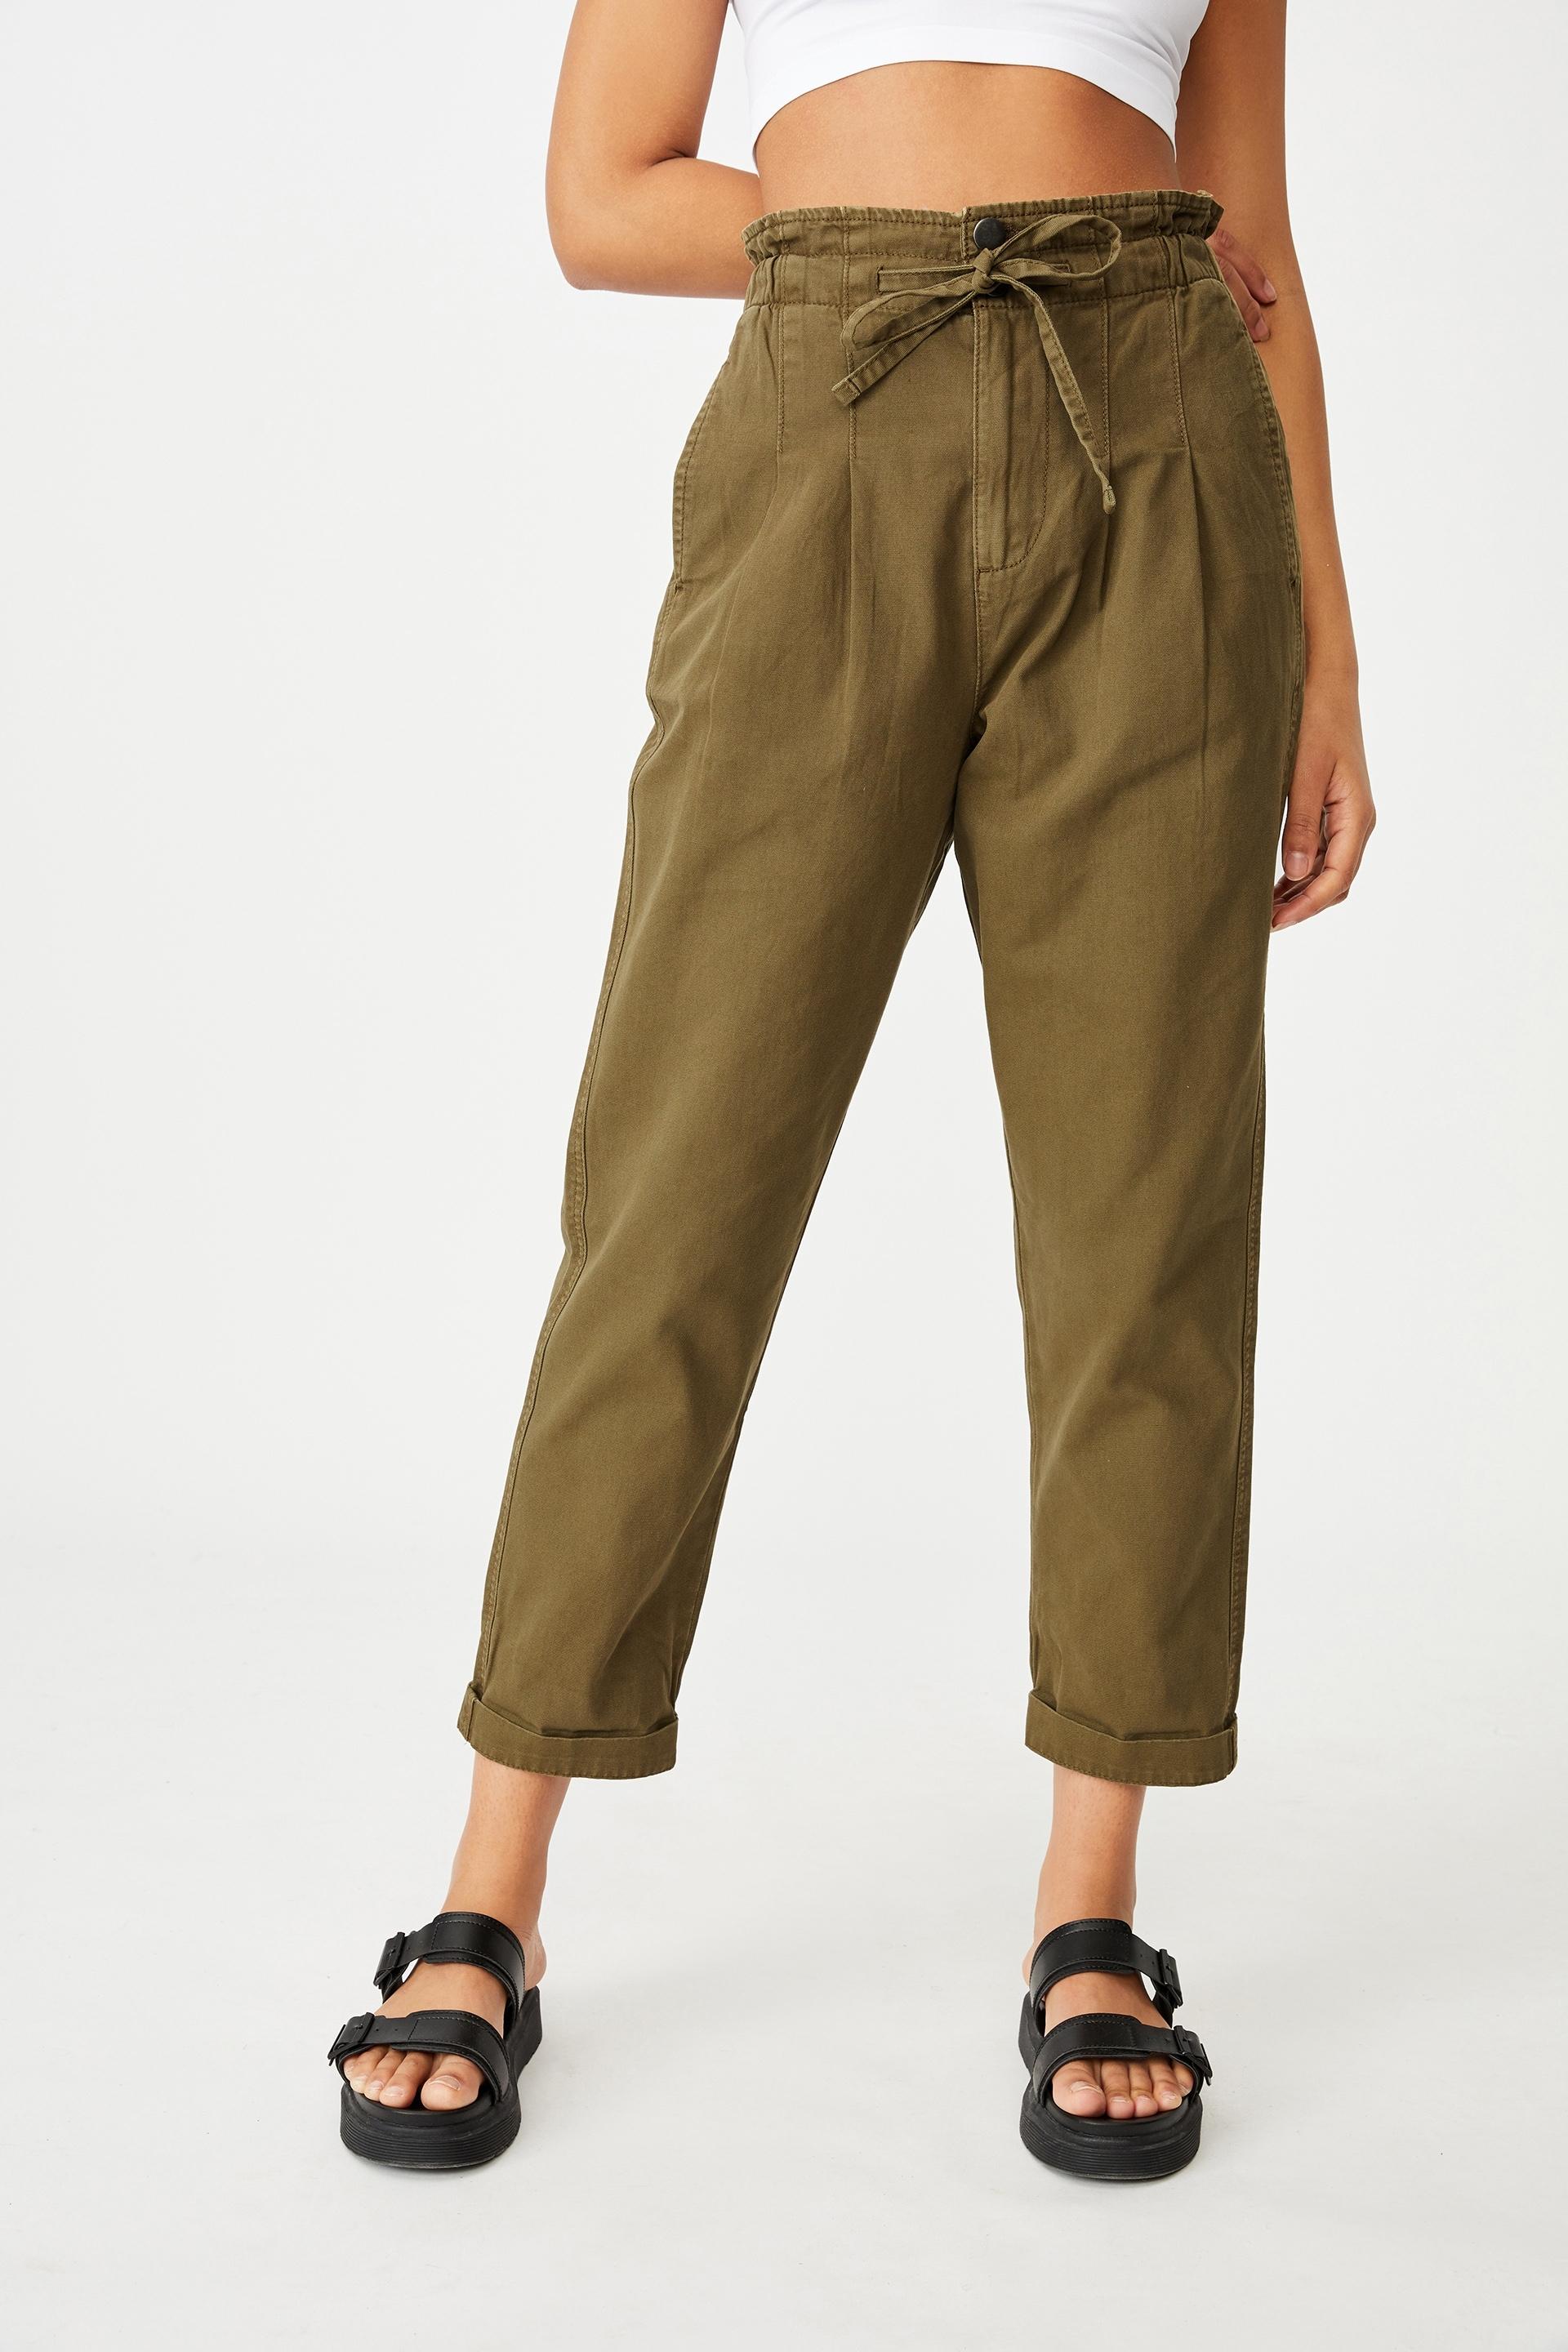 Paperbag pant - dark olive Cotton On Trousers | Superbalist.com